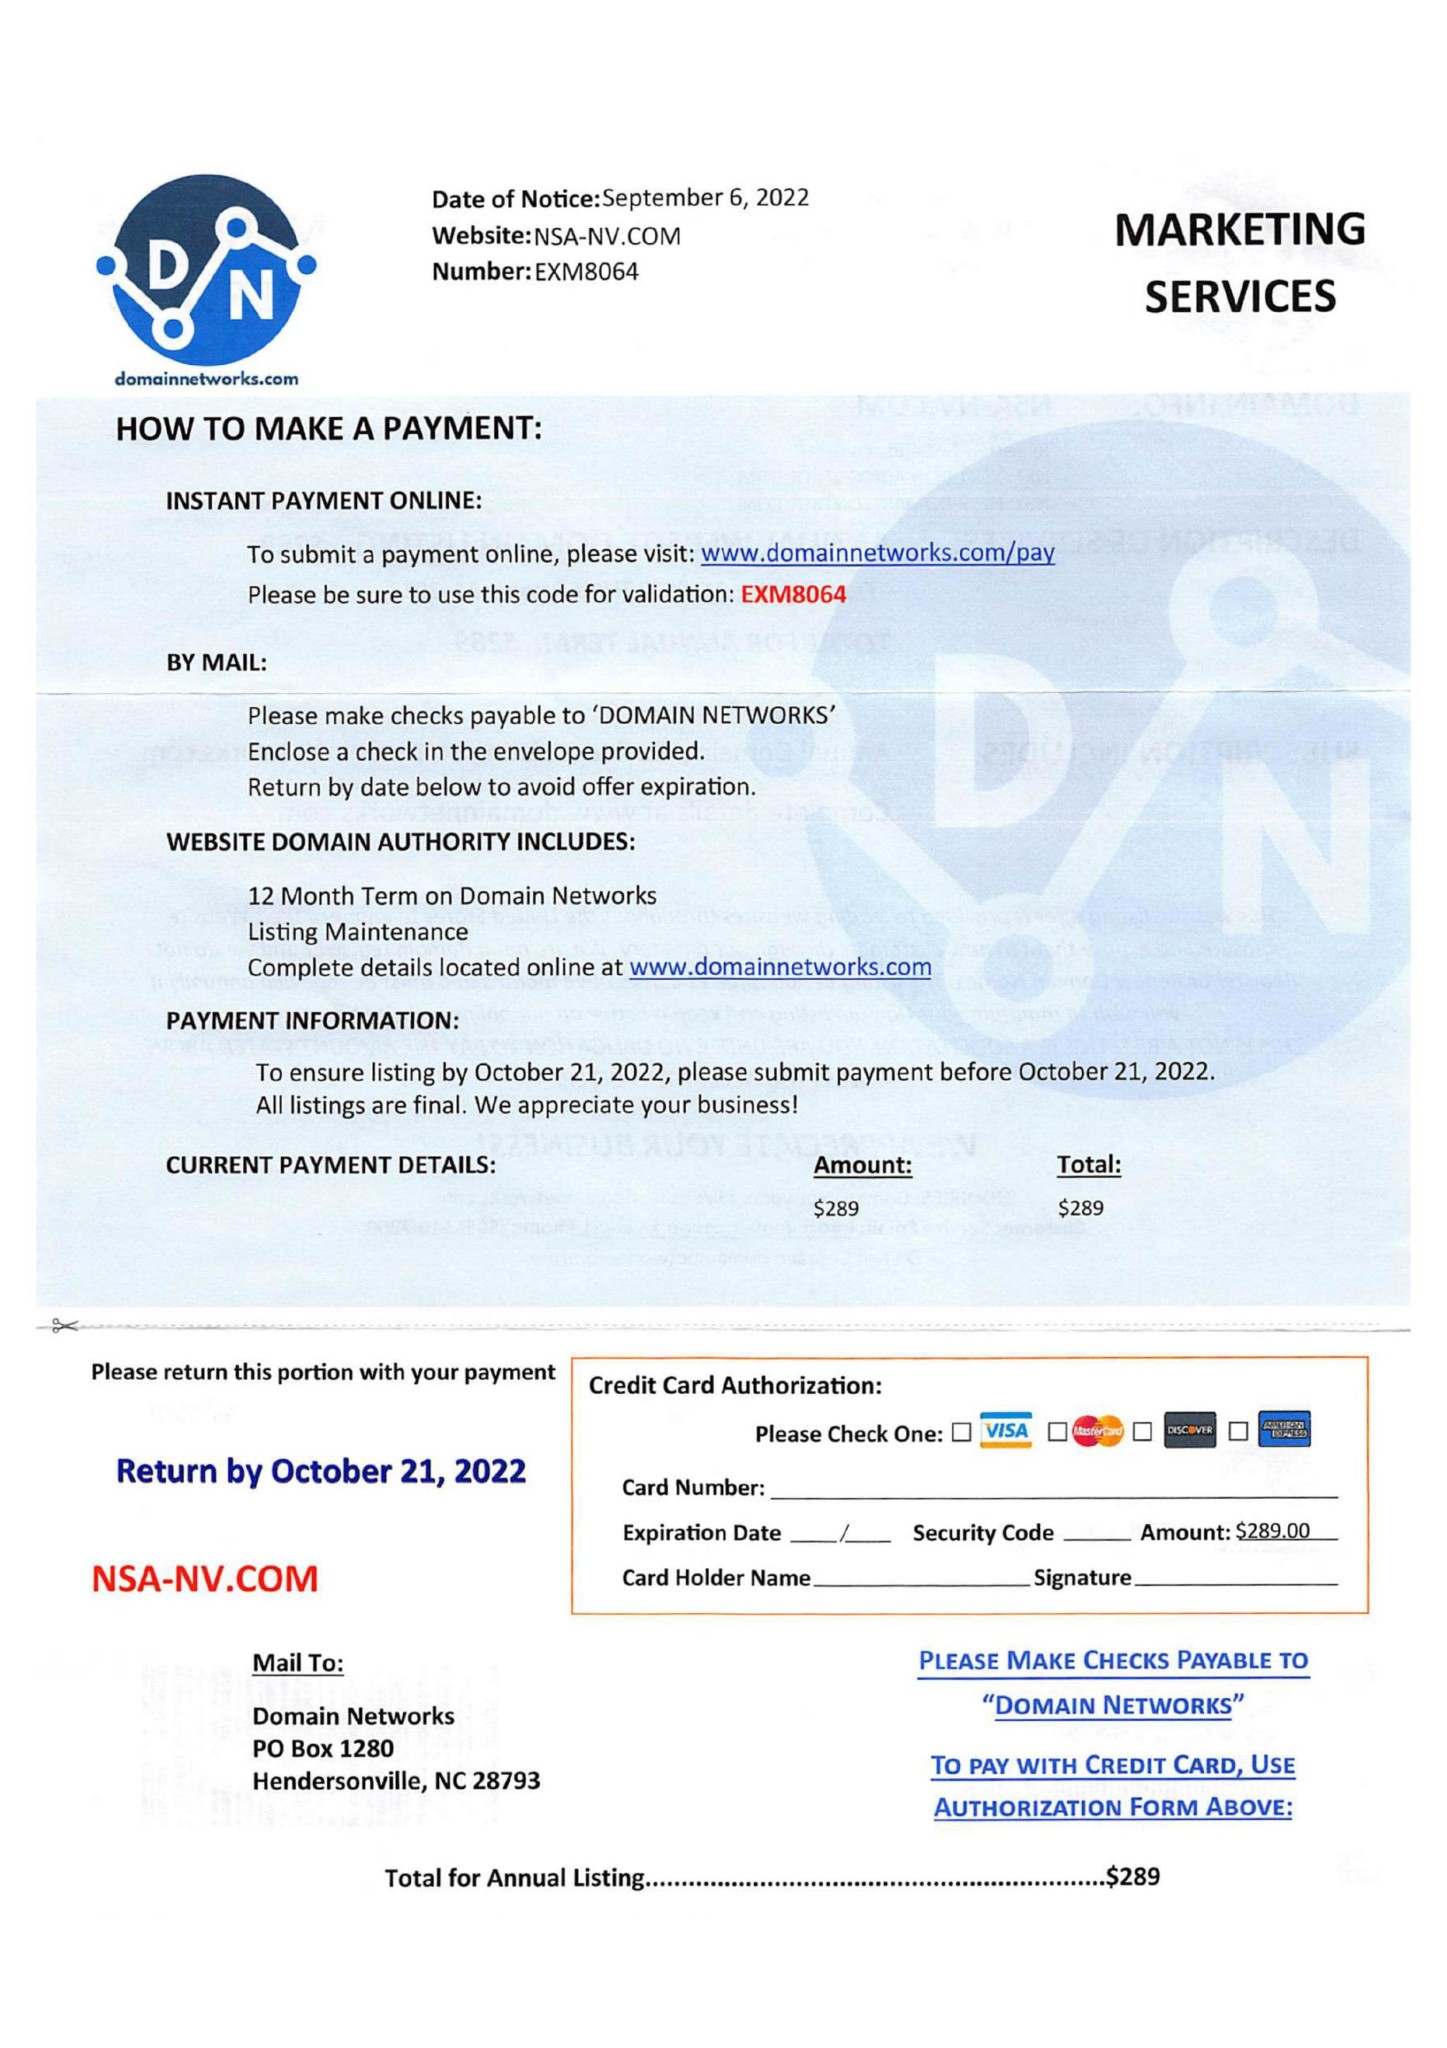 Example of actual Domain Networks invoice predatory marketing scam